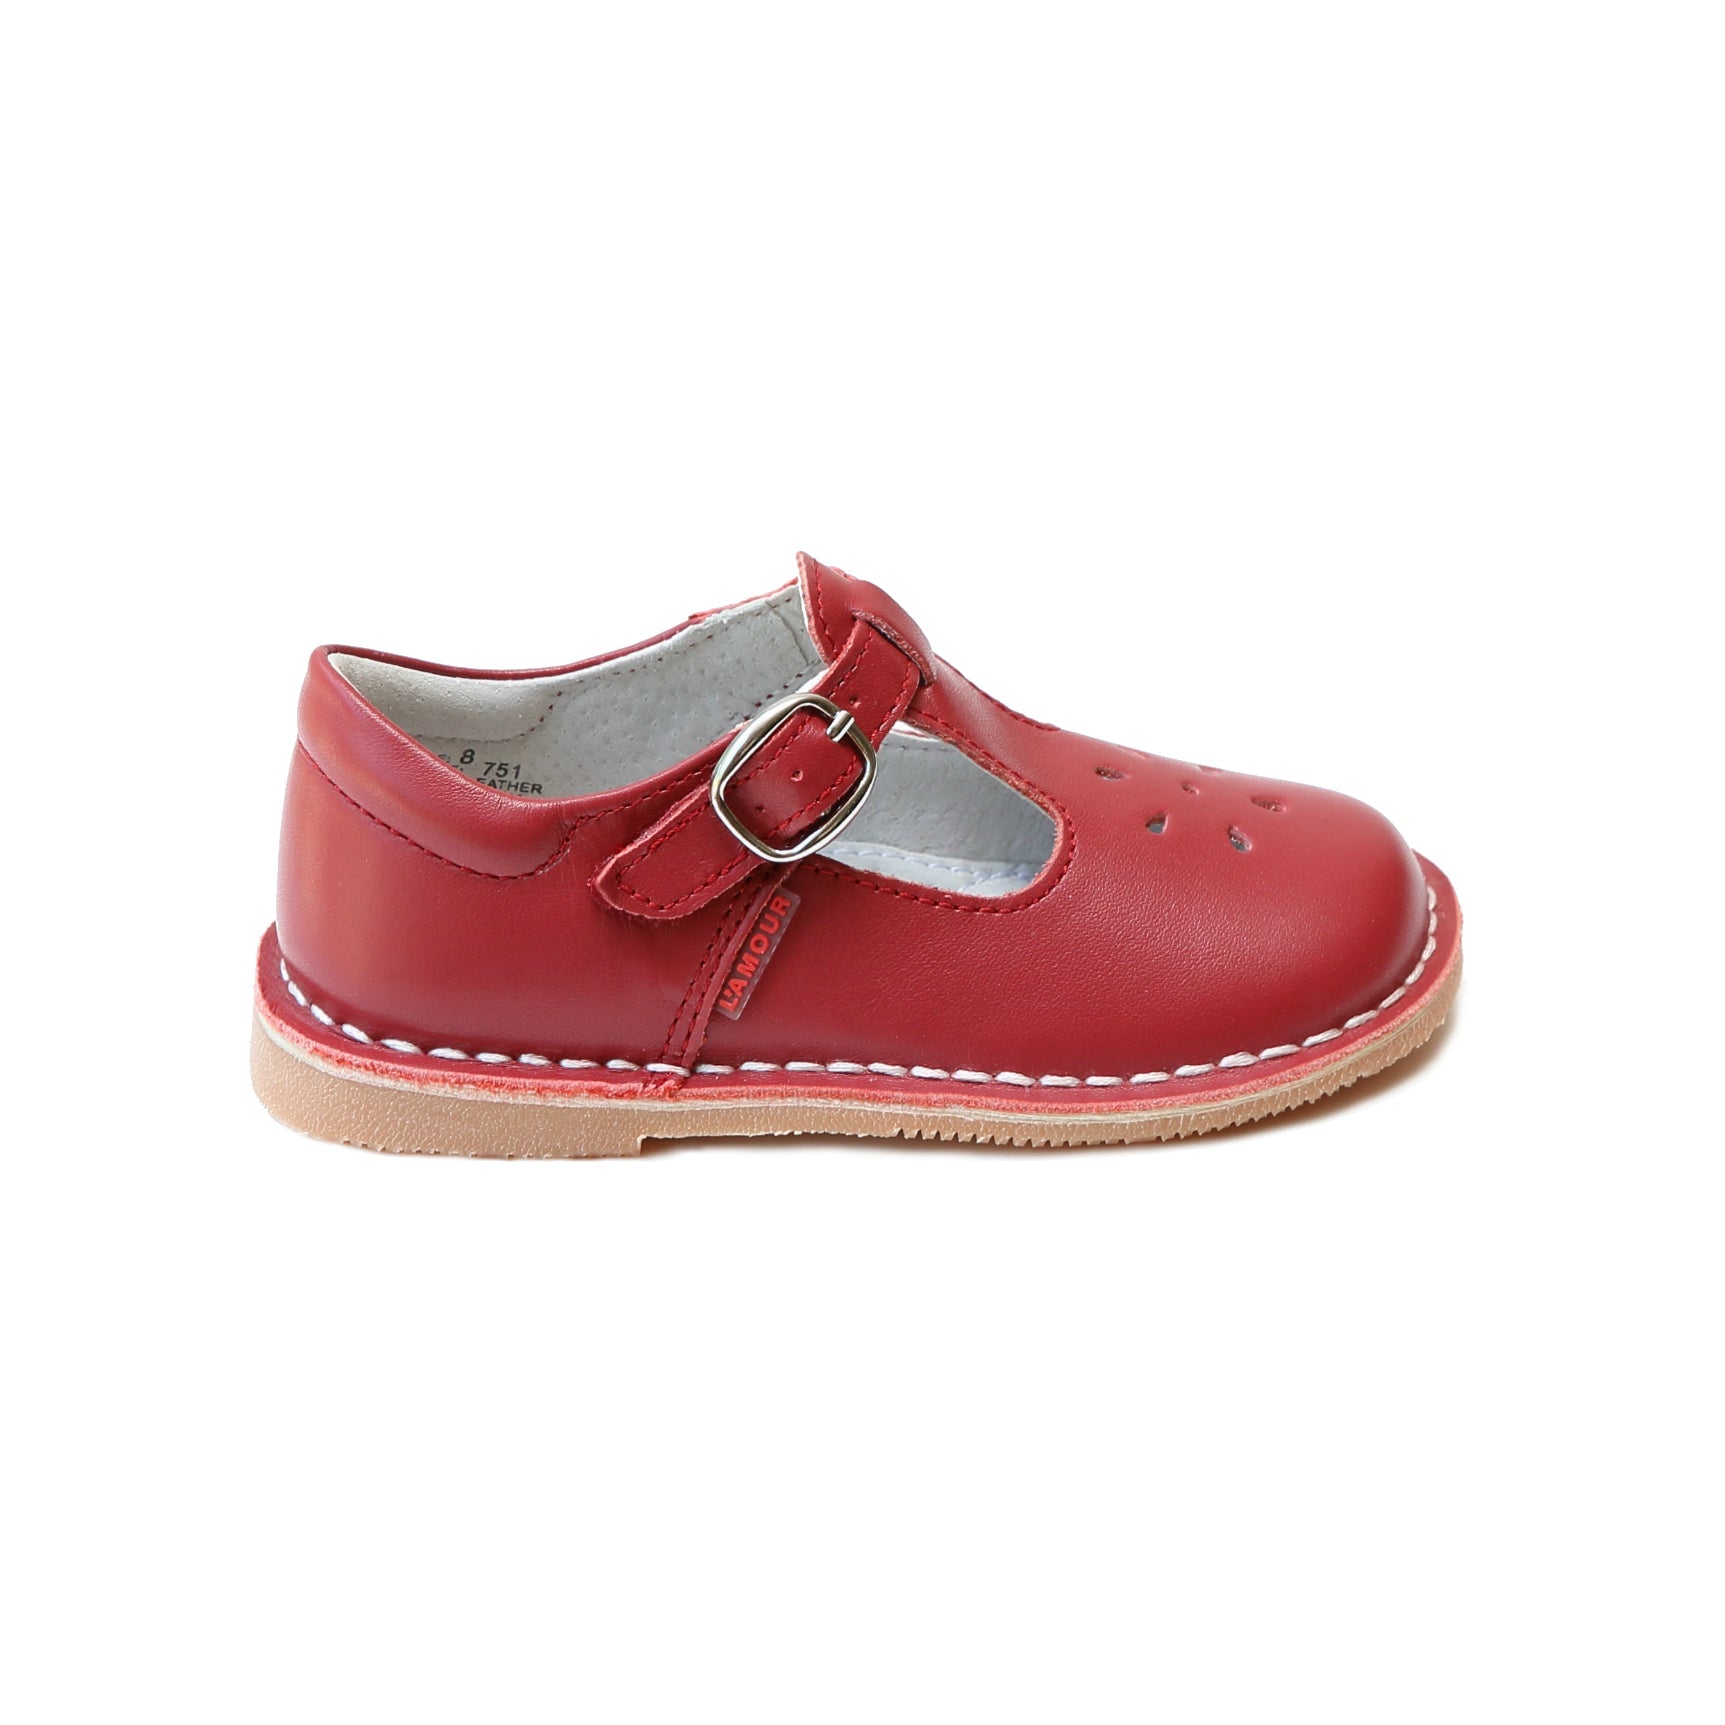 L'Amour Joy Classic Red Leather T-Strap Mary Jane Mary Janes